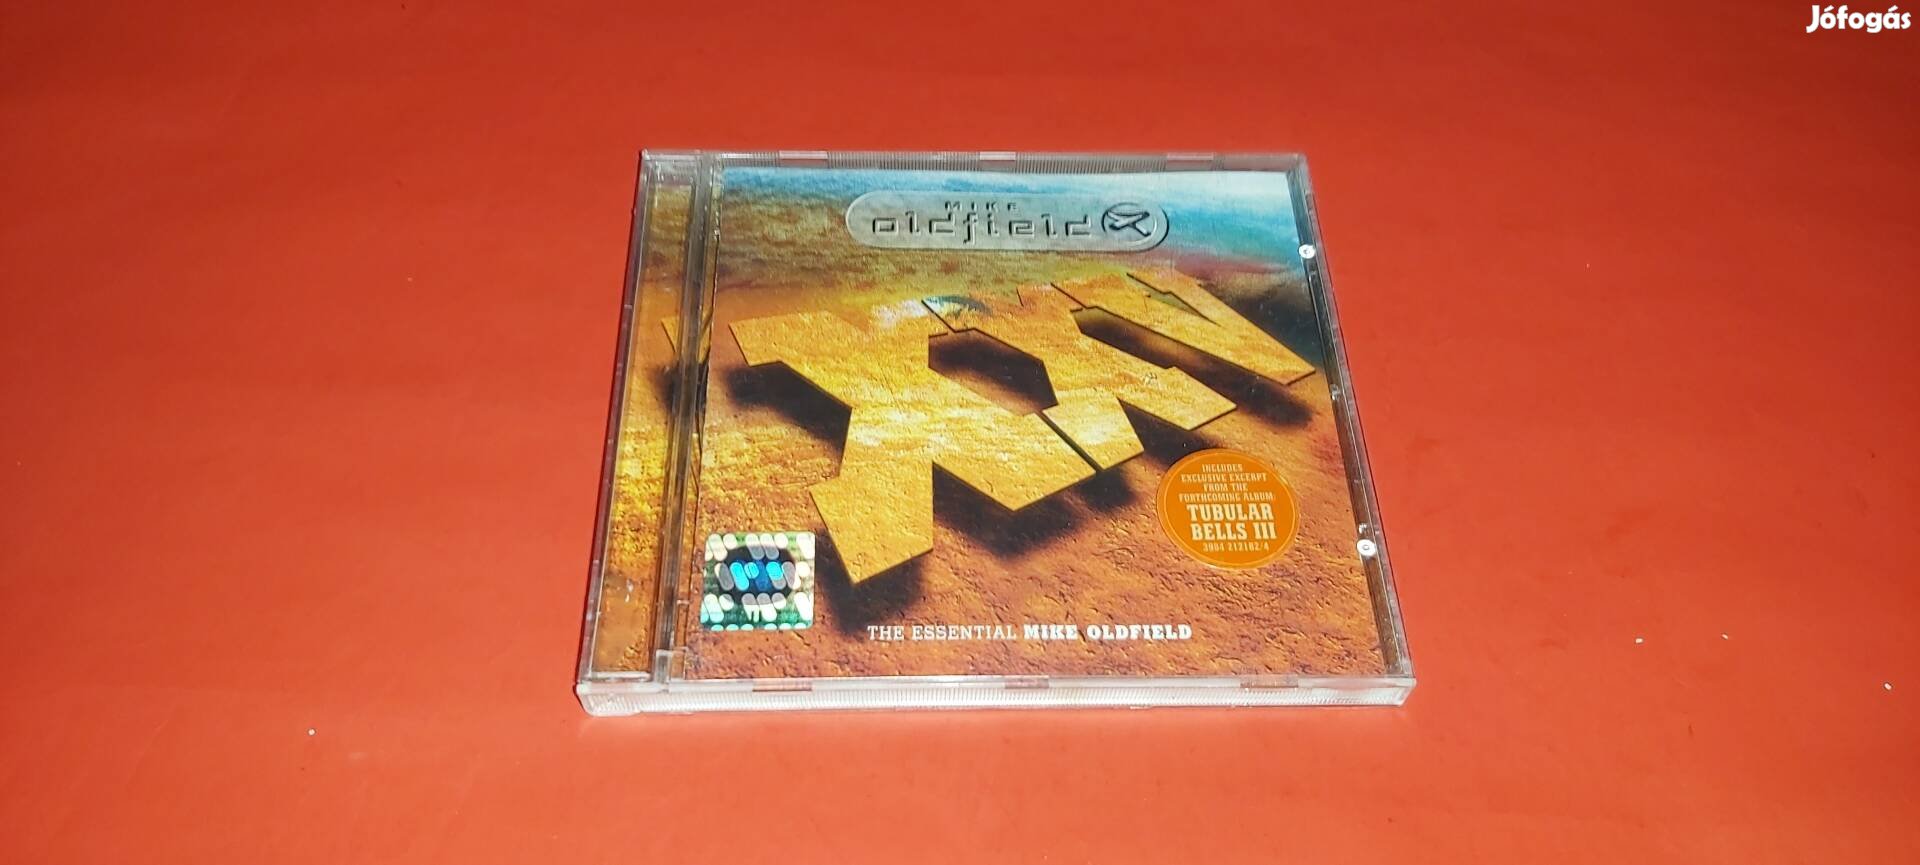 Mike Oldfield The essential Cd 1997